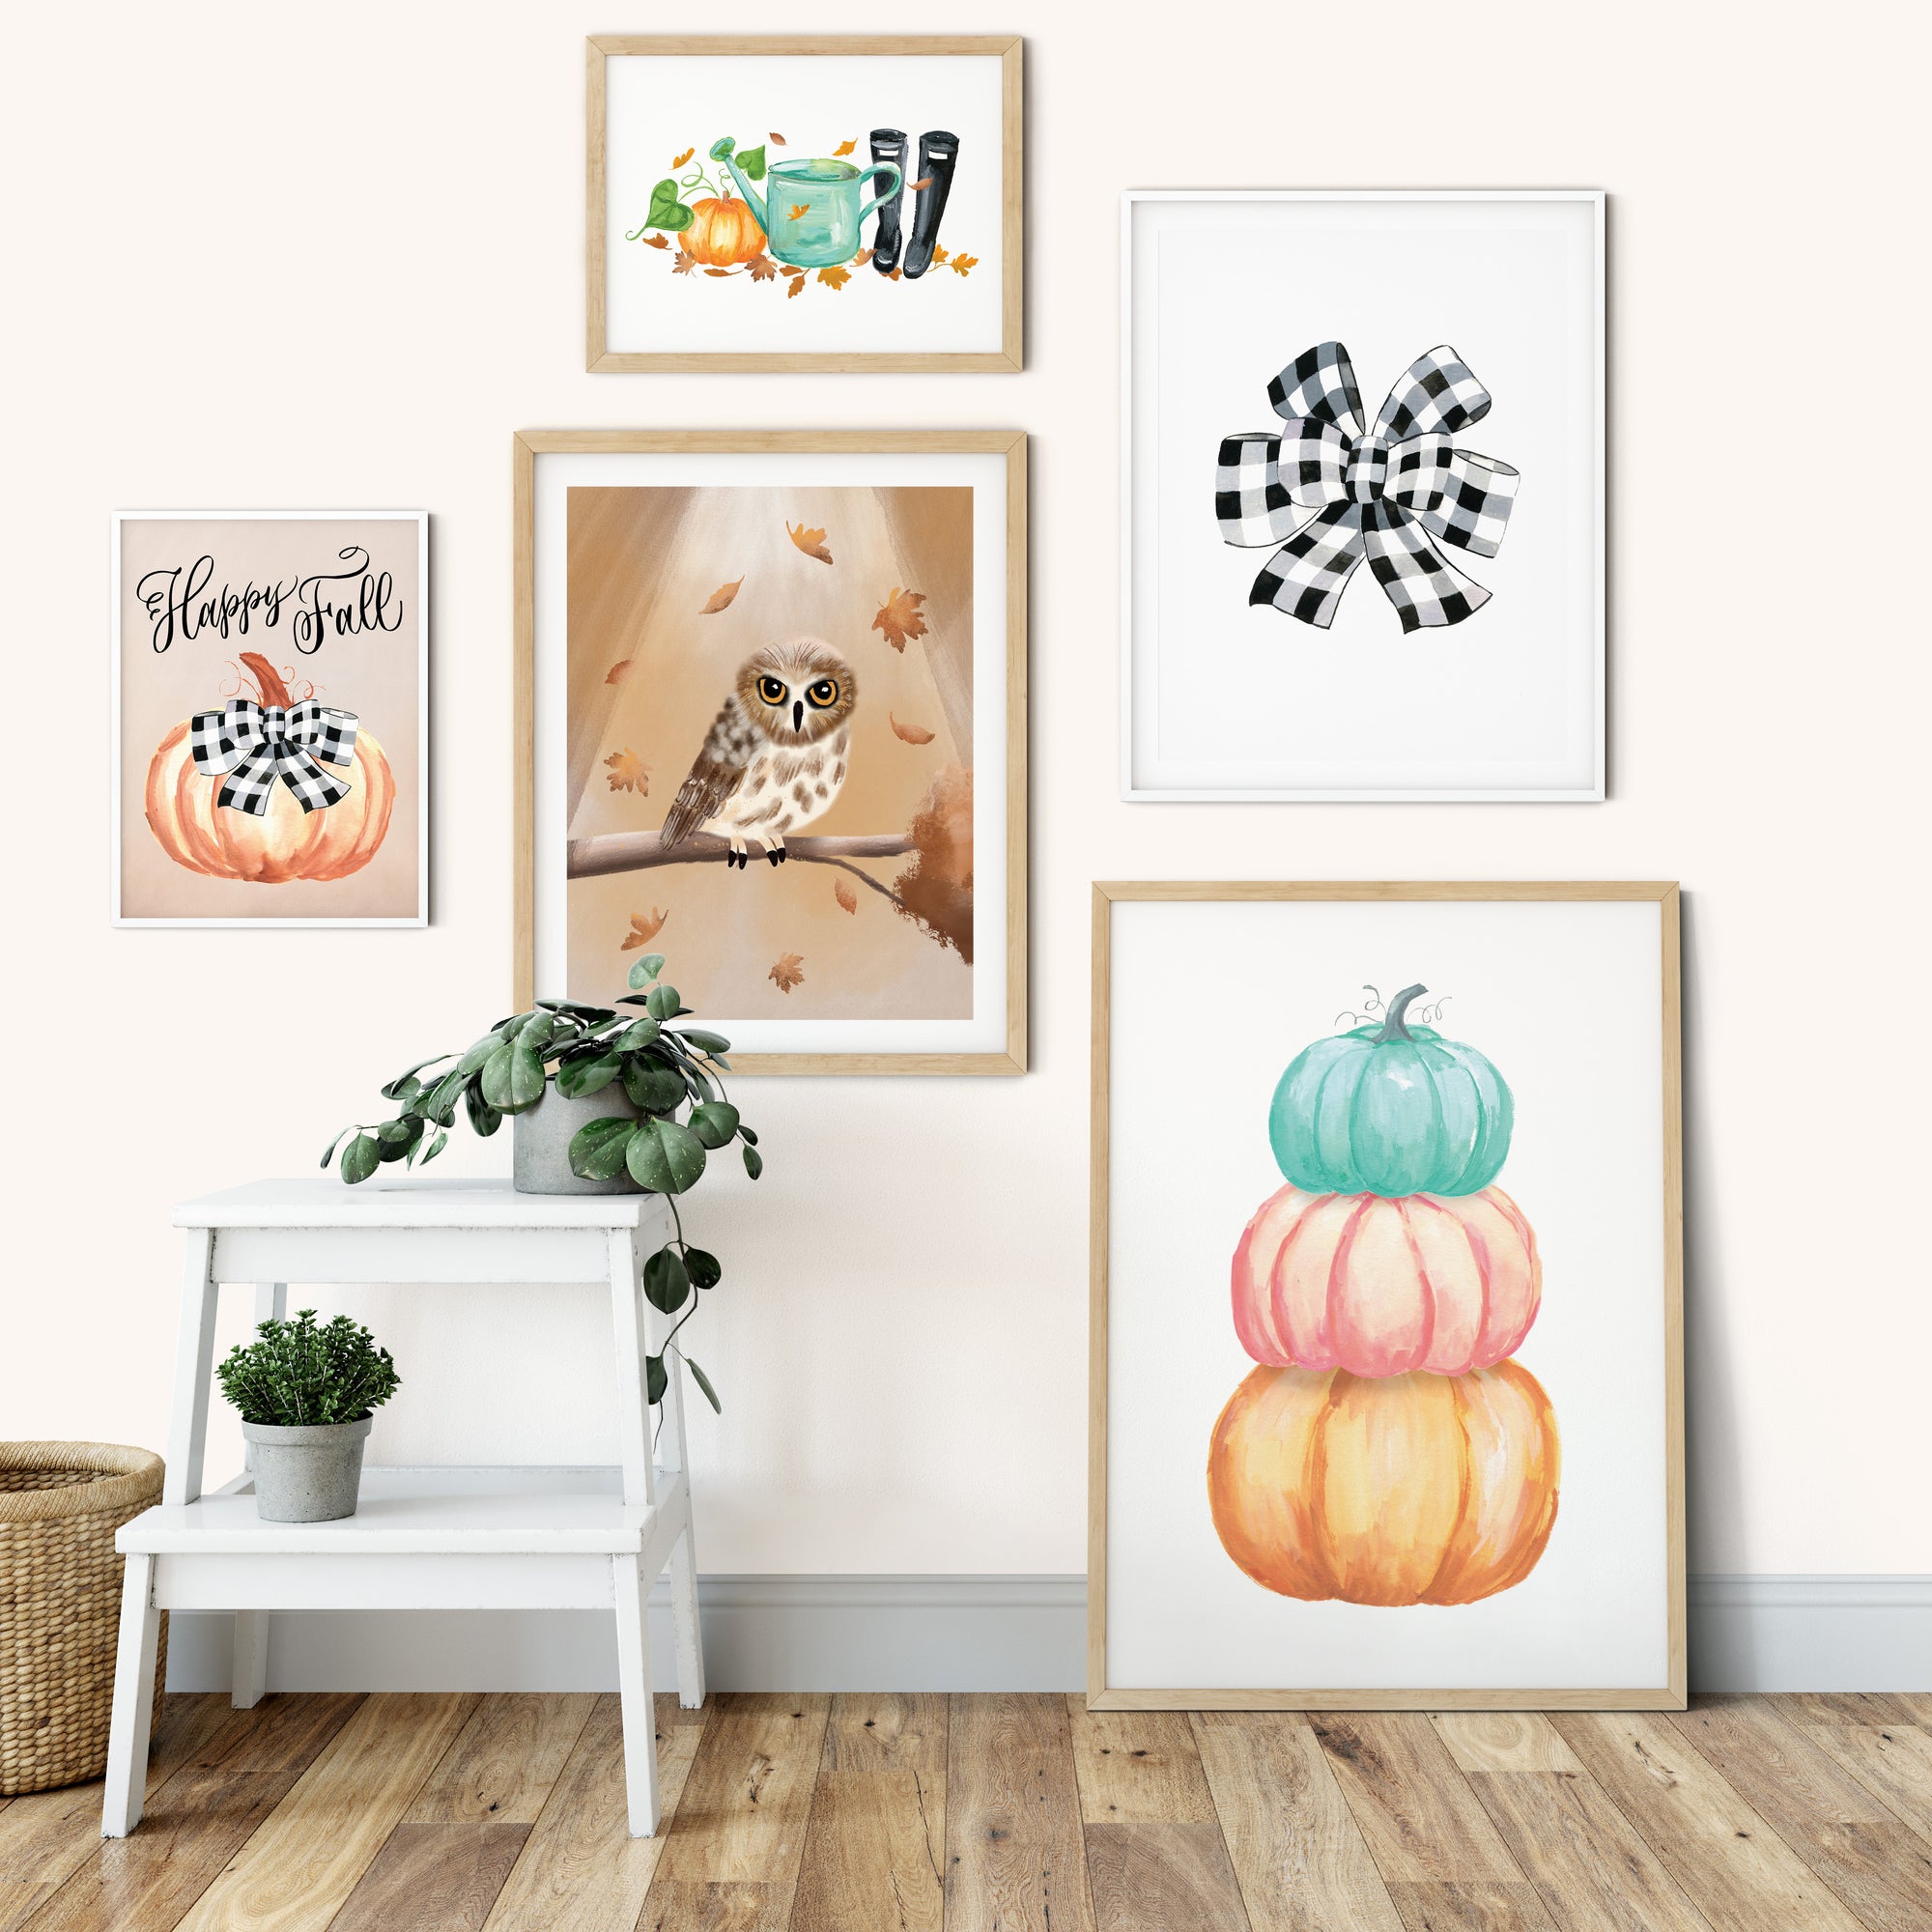 Collage of Fall Art Prints with Pumpkins, Buffalo Check Bows, Owls, and Fall Gardening items